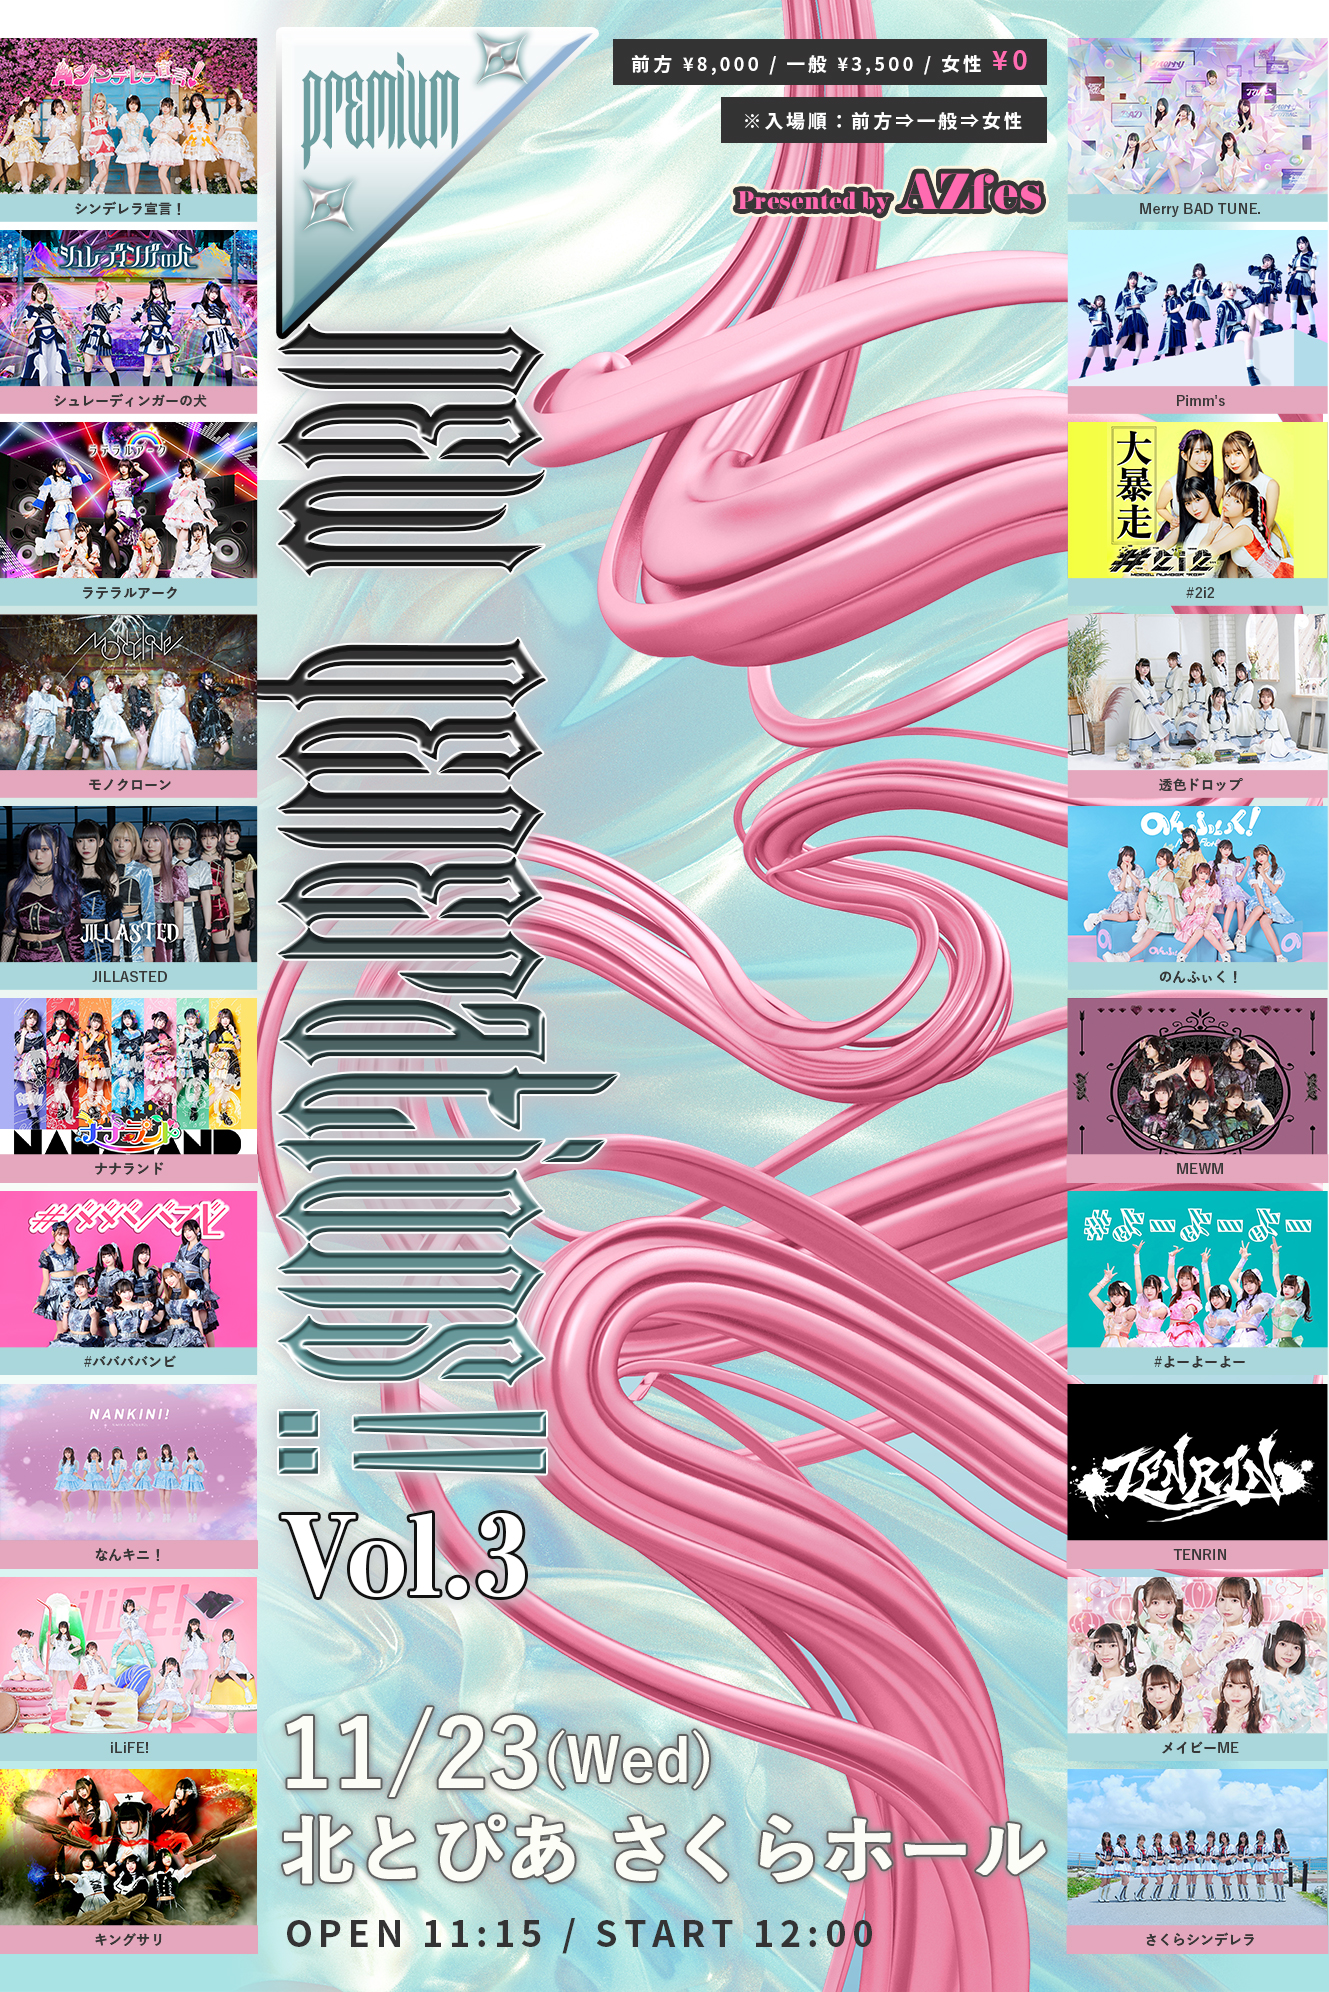 New Generations!! Vol.3 ~Premium~ Presented by AZfes